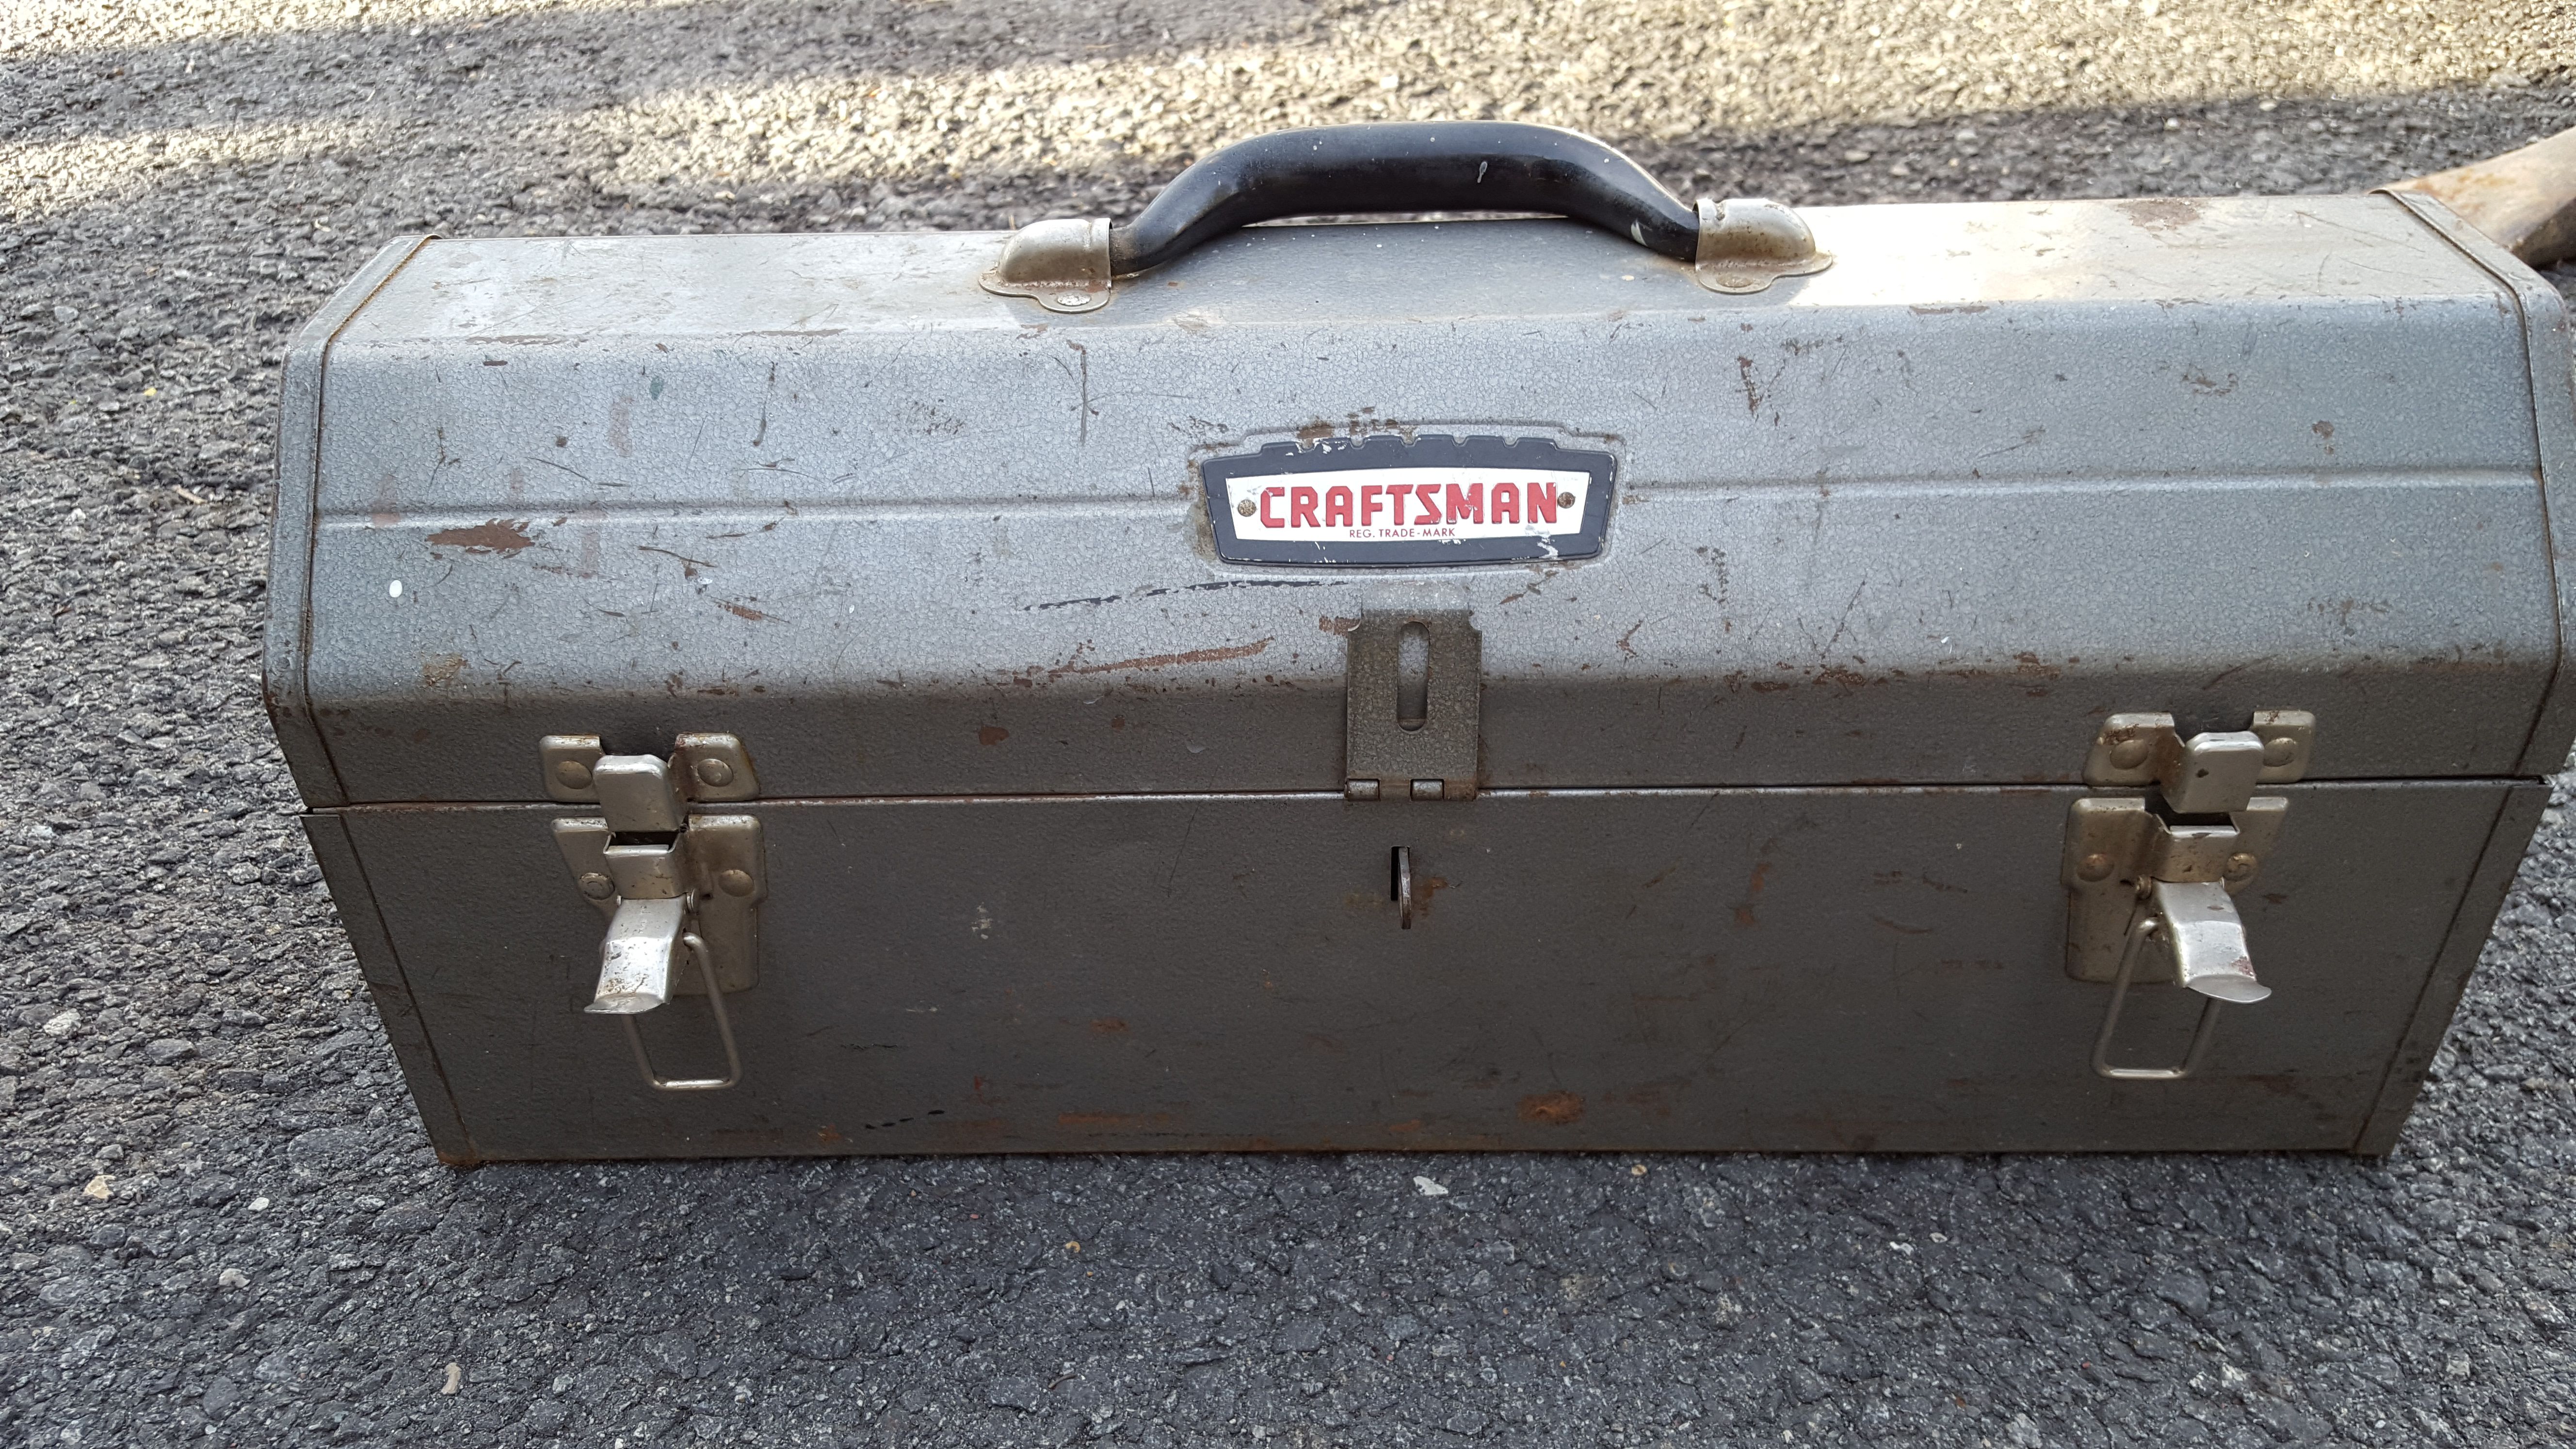 Vintage Craftsman toolbox with tray